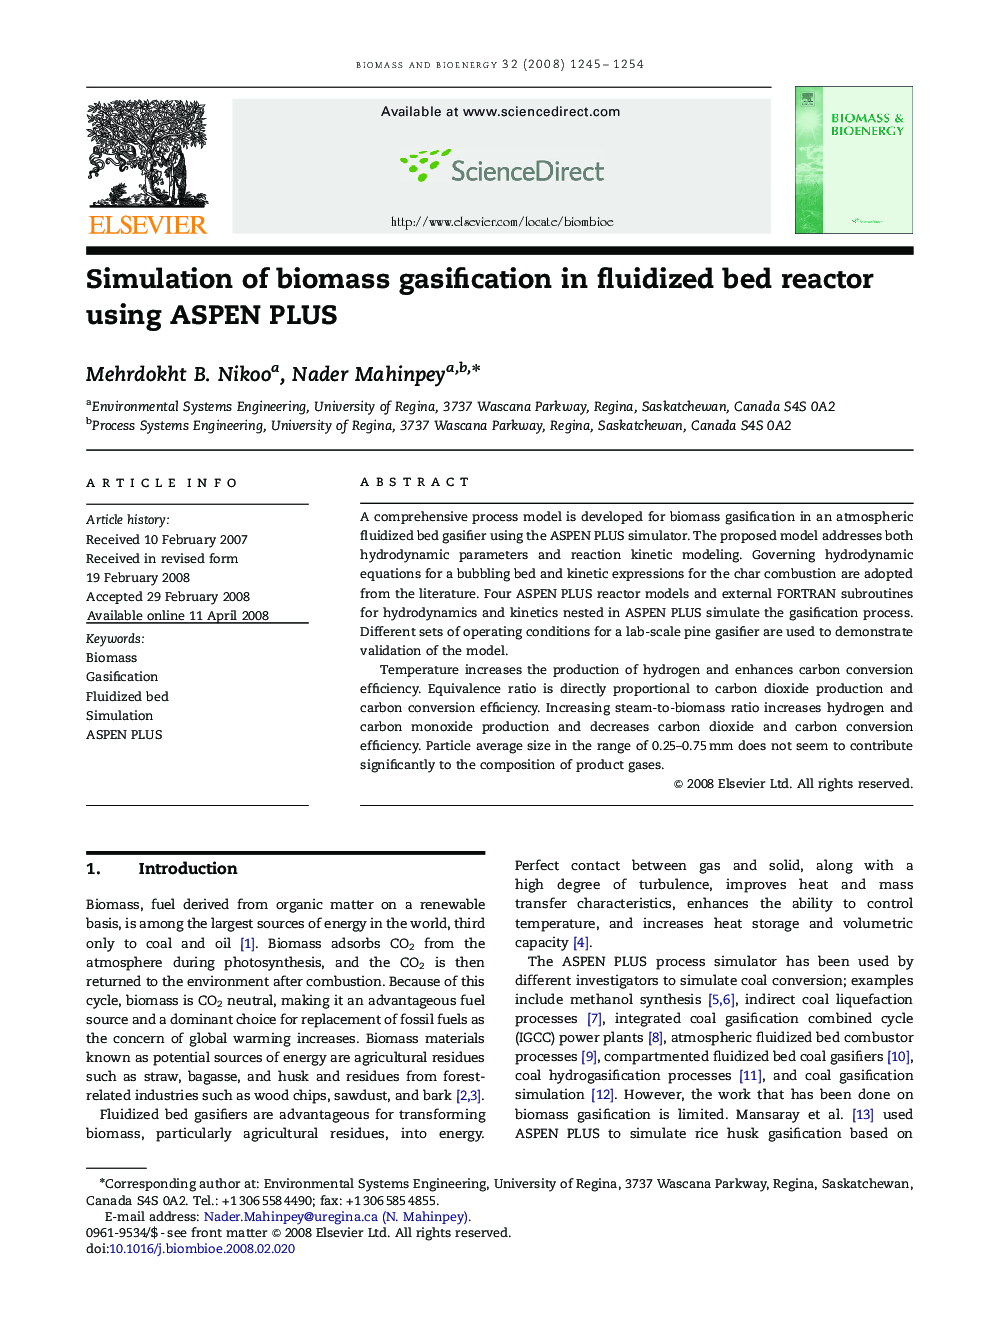 Simulation of biomass gasification in fluidized bed reactor using ASPEN PLUS